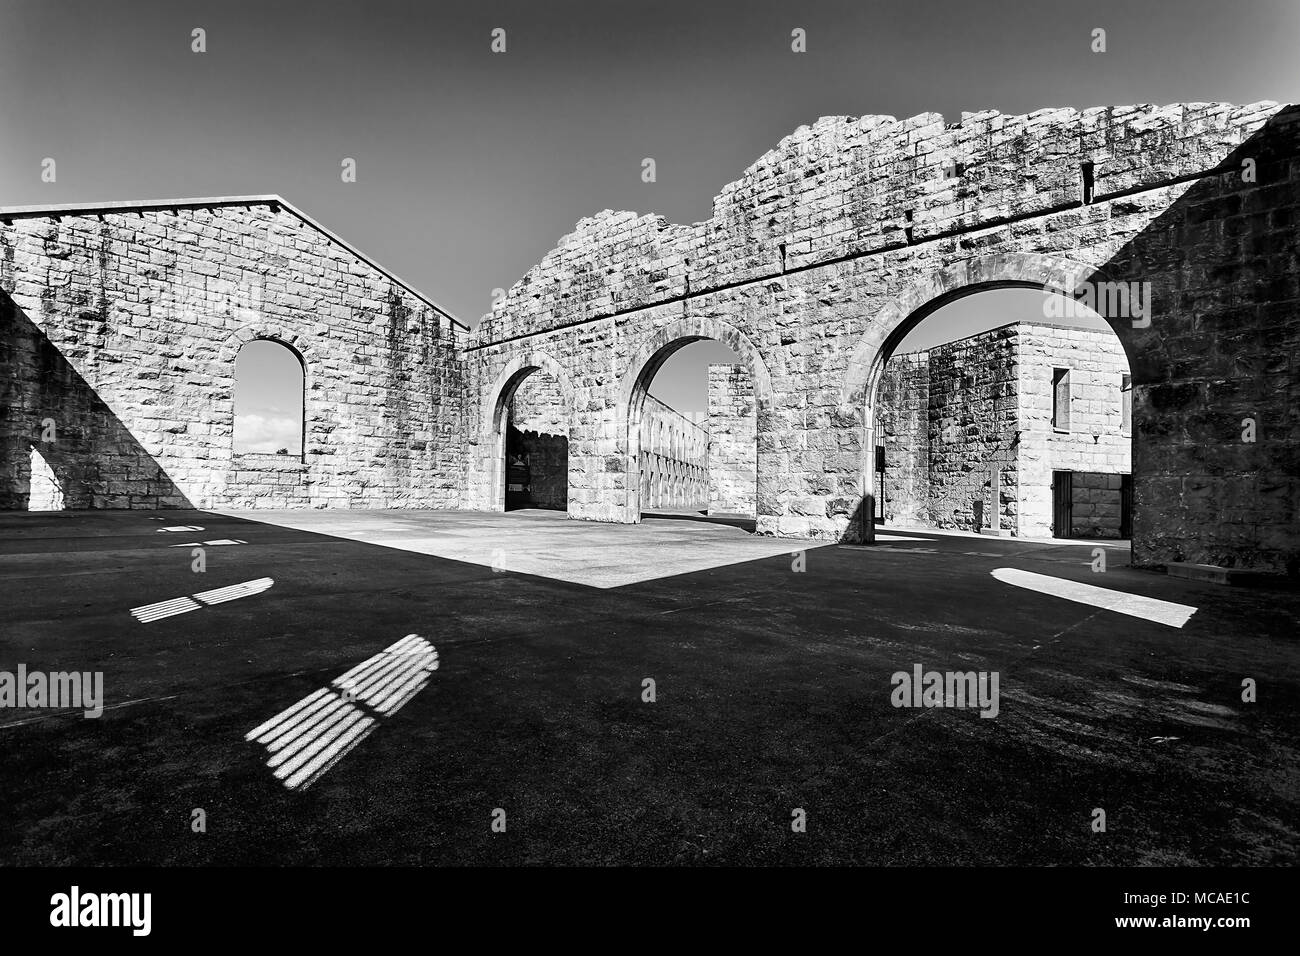 Inner yard of stone with brick walls but no roof in historic heritage Trial Bay Gaol of NSW of Australia. Contrast black-white impression of correctio Stock Photo